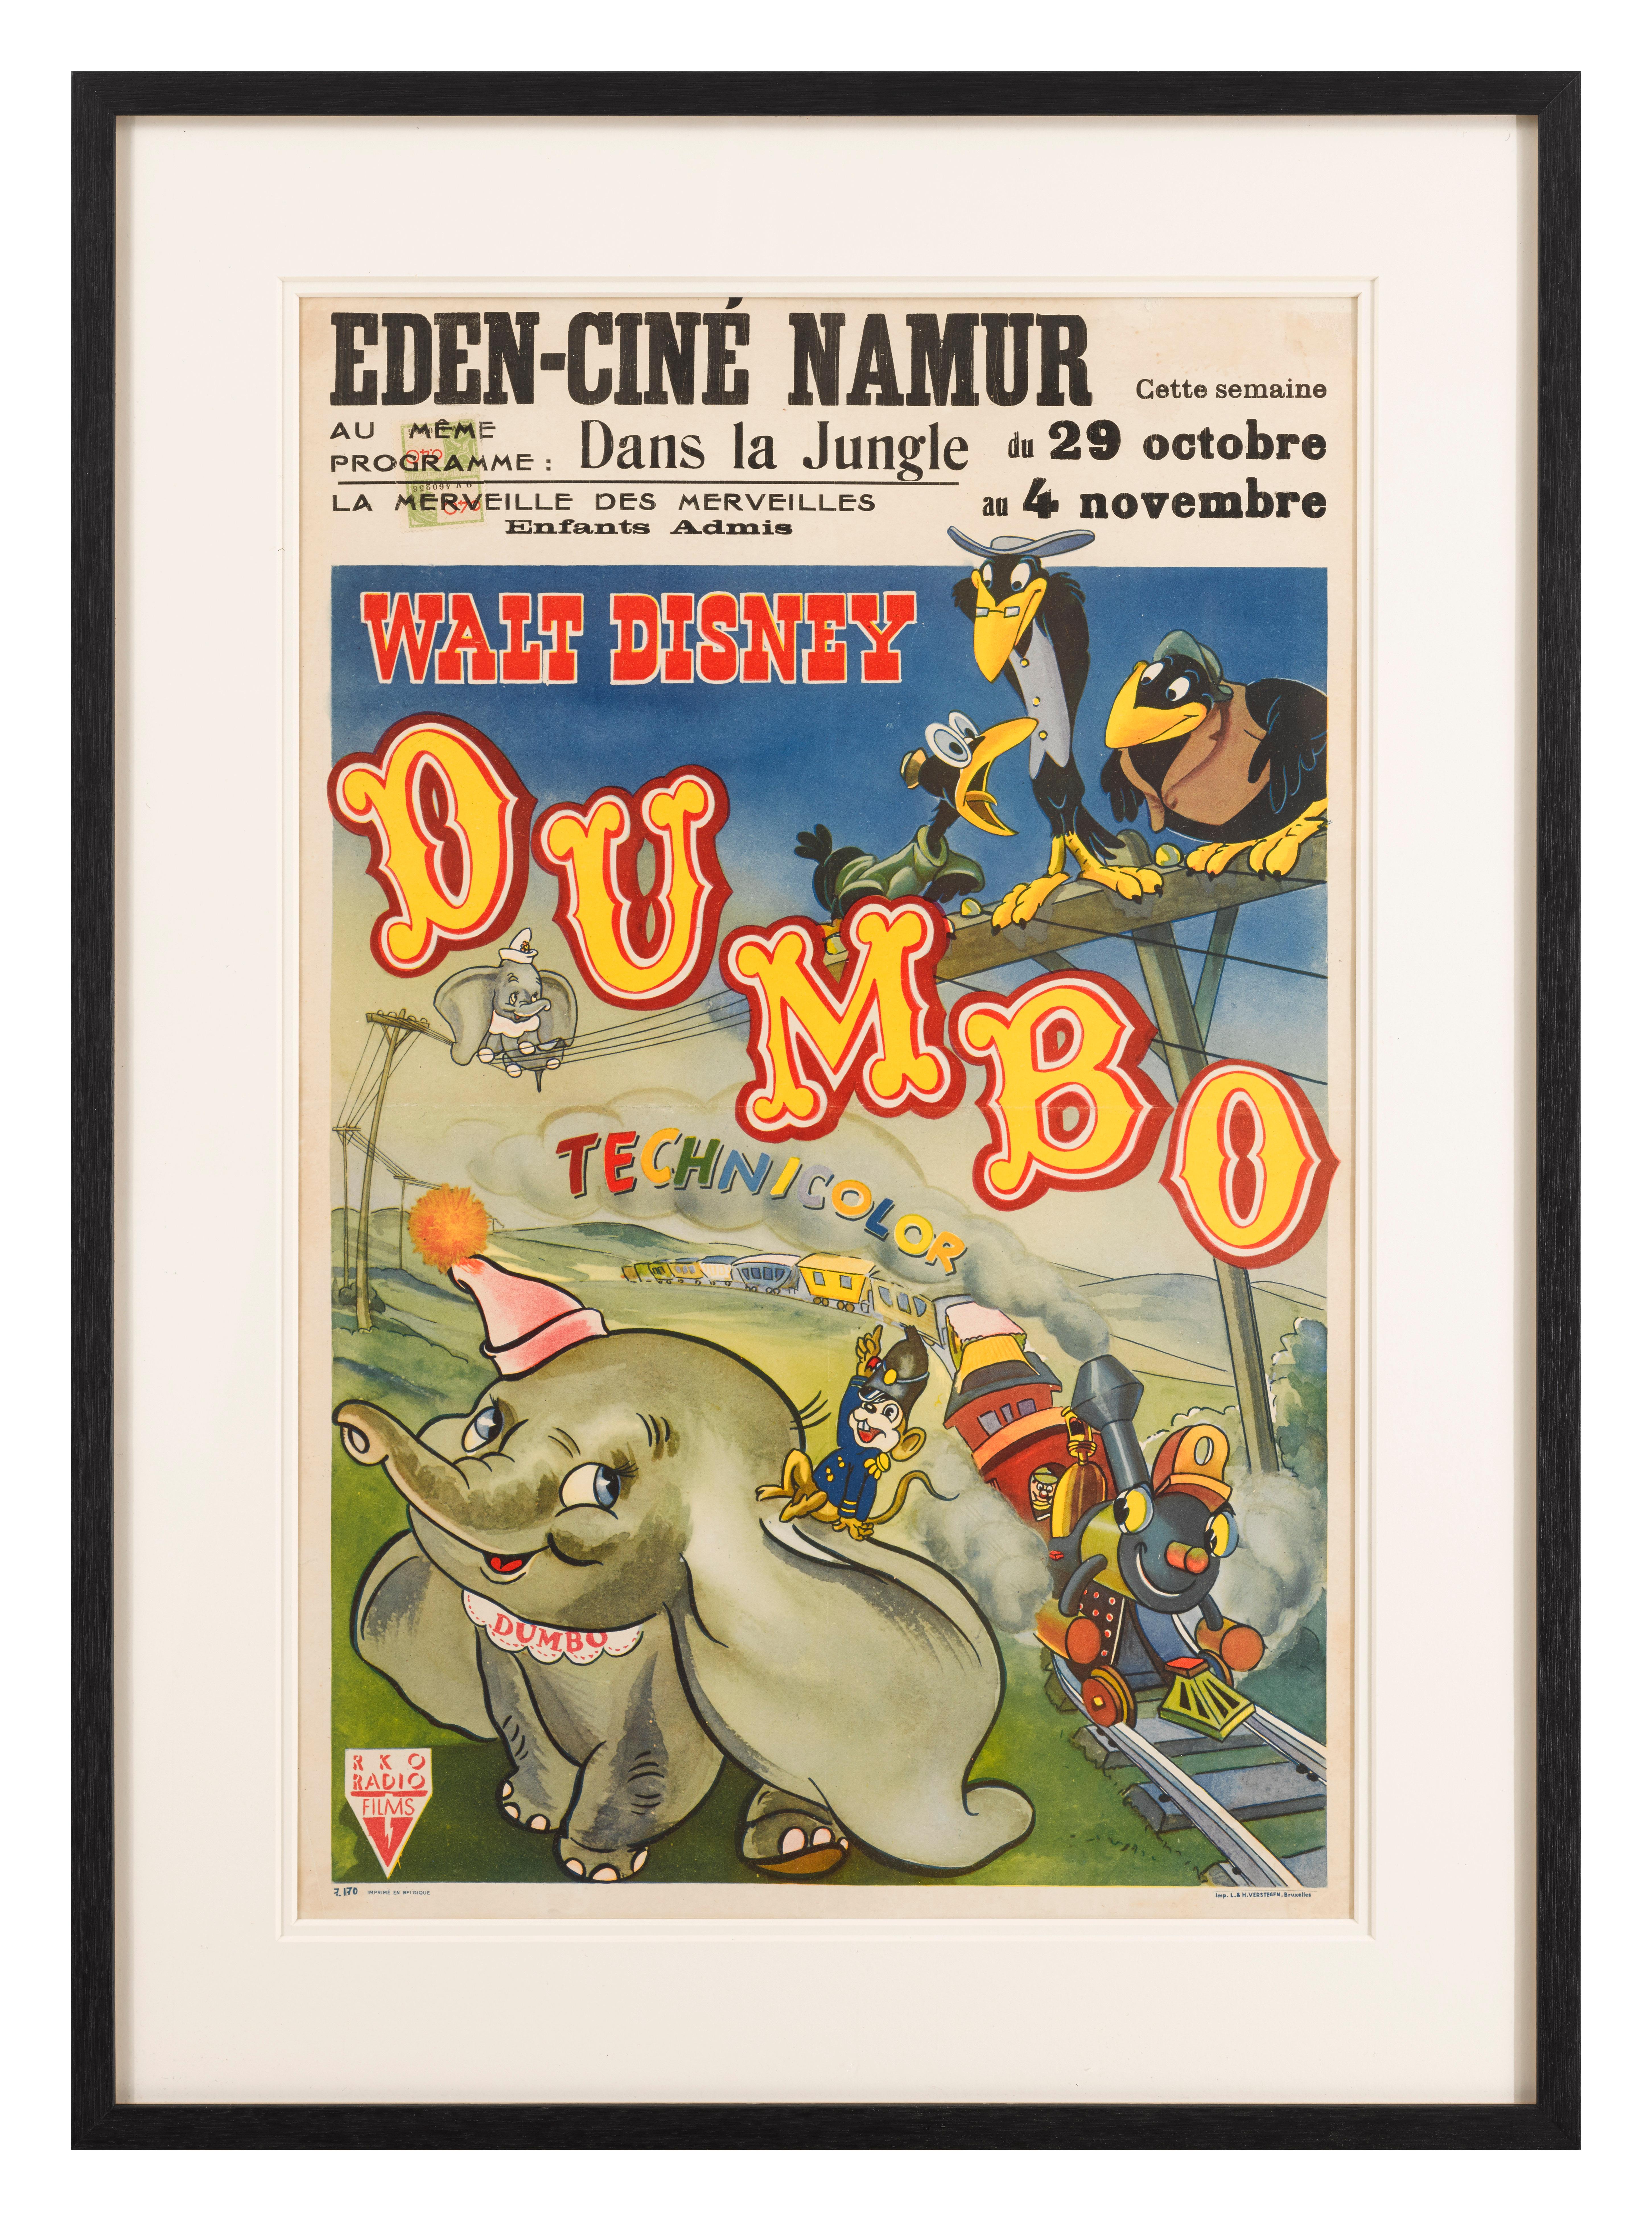 Original Japanese program cover for Walt Disney's 1941 classic Walt Disney animation film.
The film had it's first release in Japan in 1954.
This piece is conservation paper backed and framed in a Sapele wood frame with acid free card mounts and